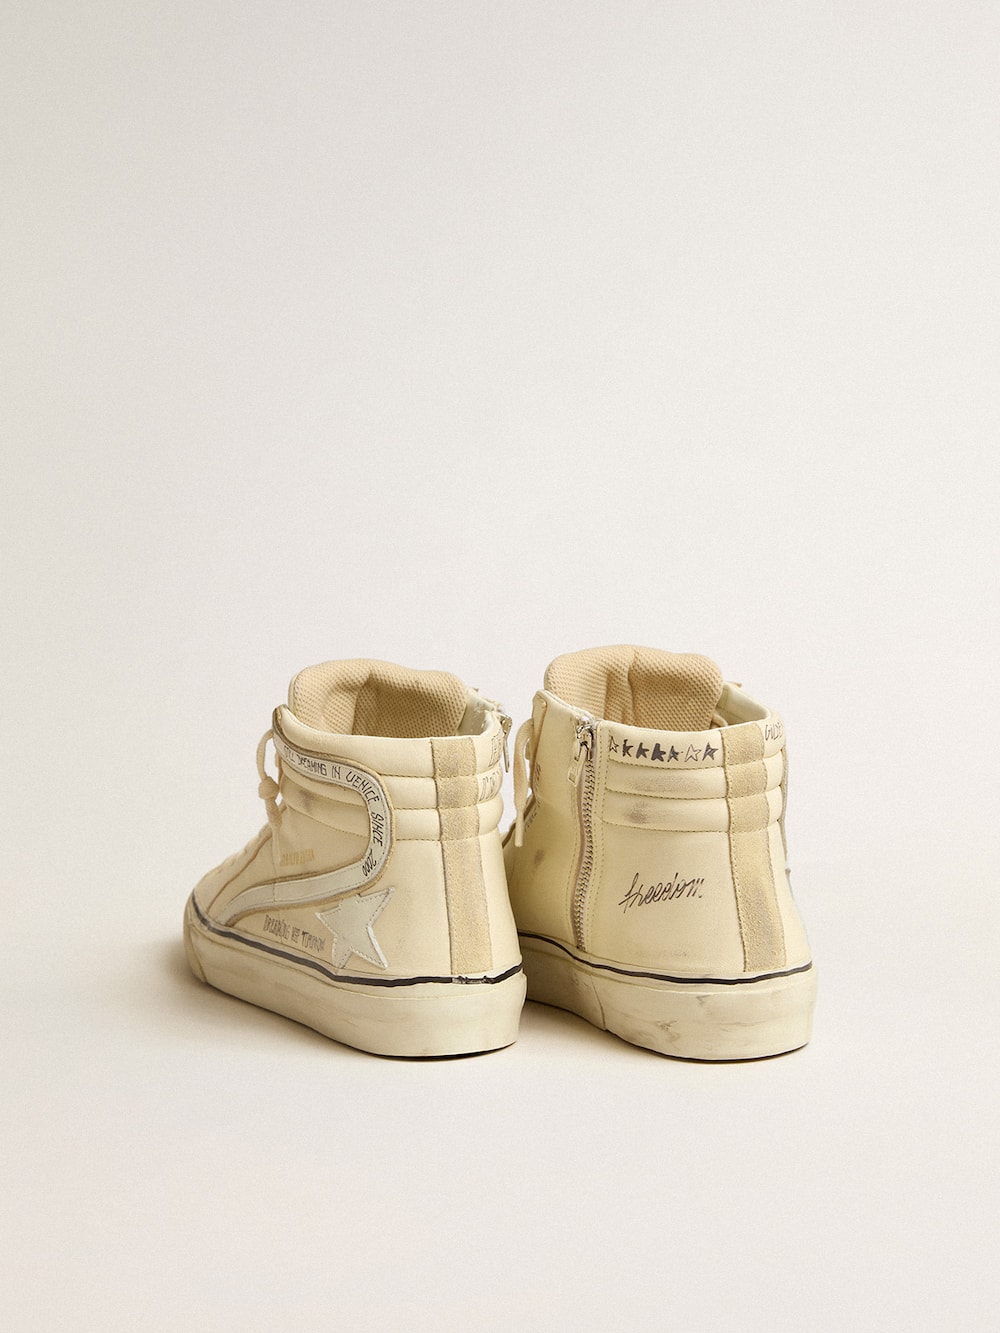 Golden Goose - Men's Slide LTD in milk-white nappa with white leather star and flash in 